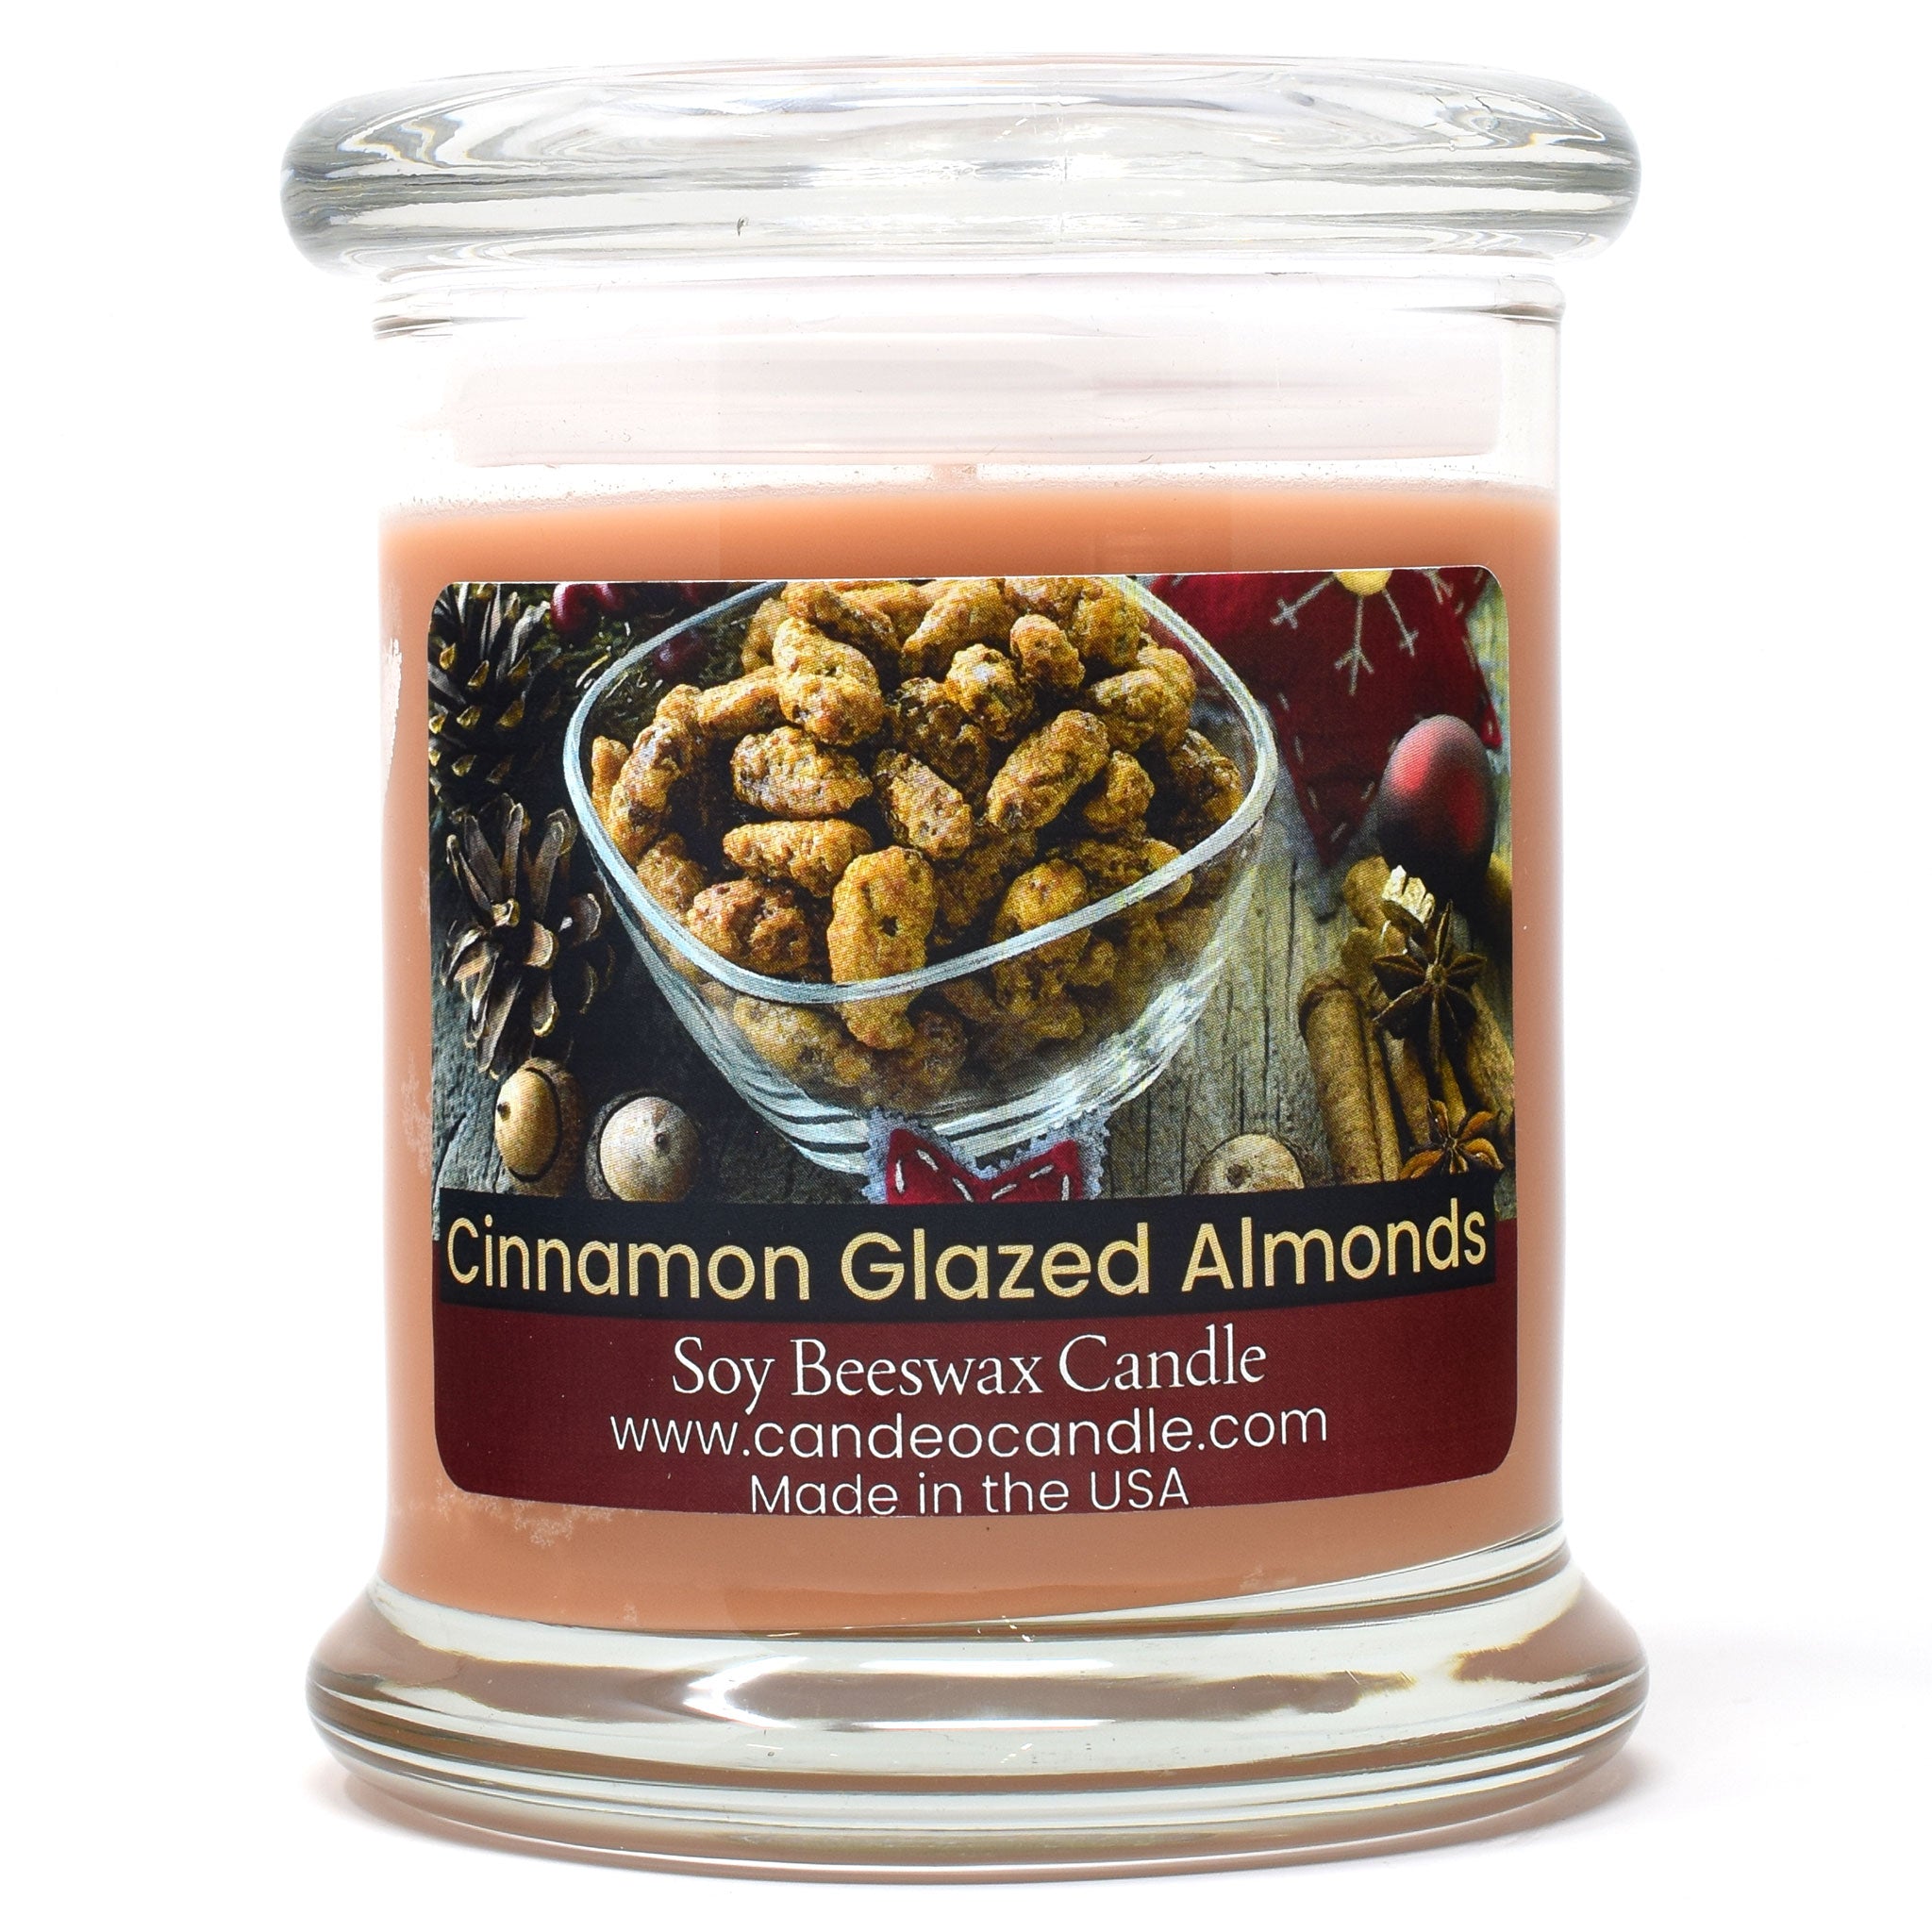 Cinnamon Glazed Almonds, 9oz Soy Candle Jar - Candeo Candle